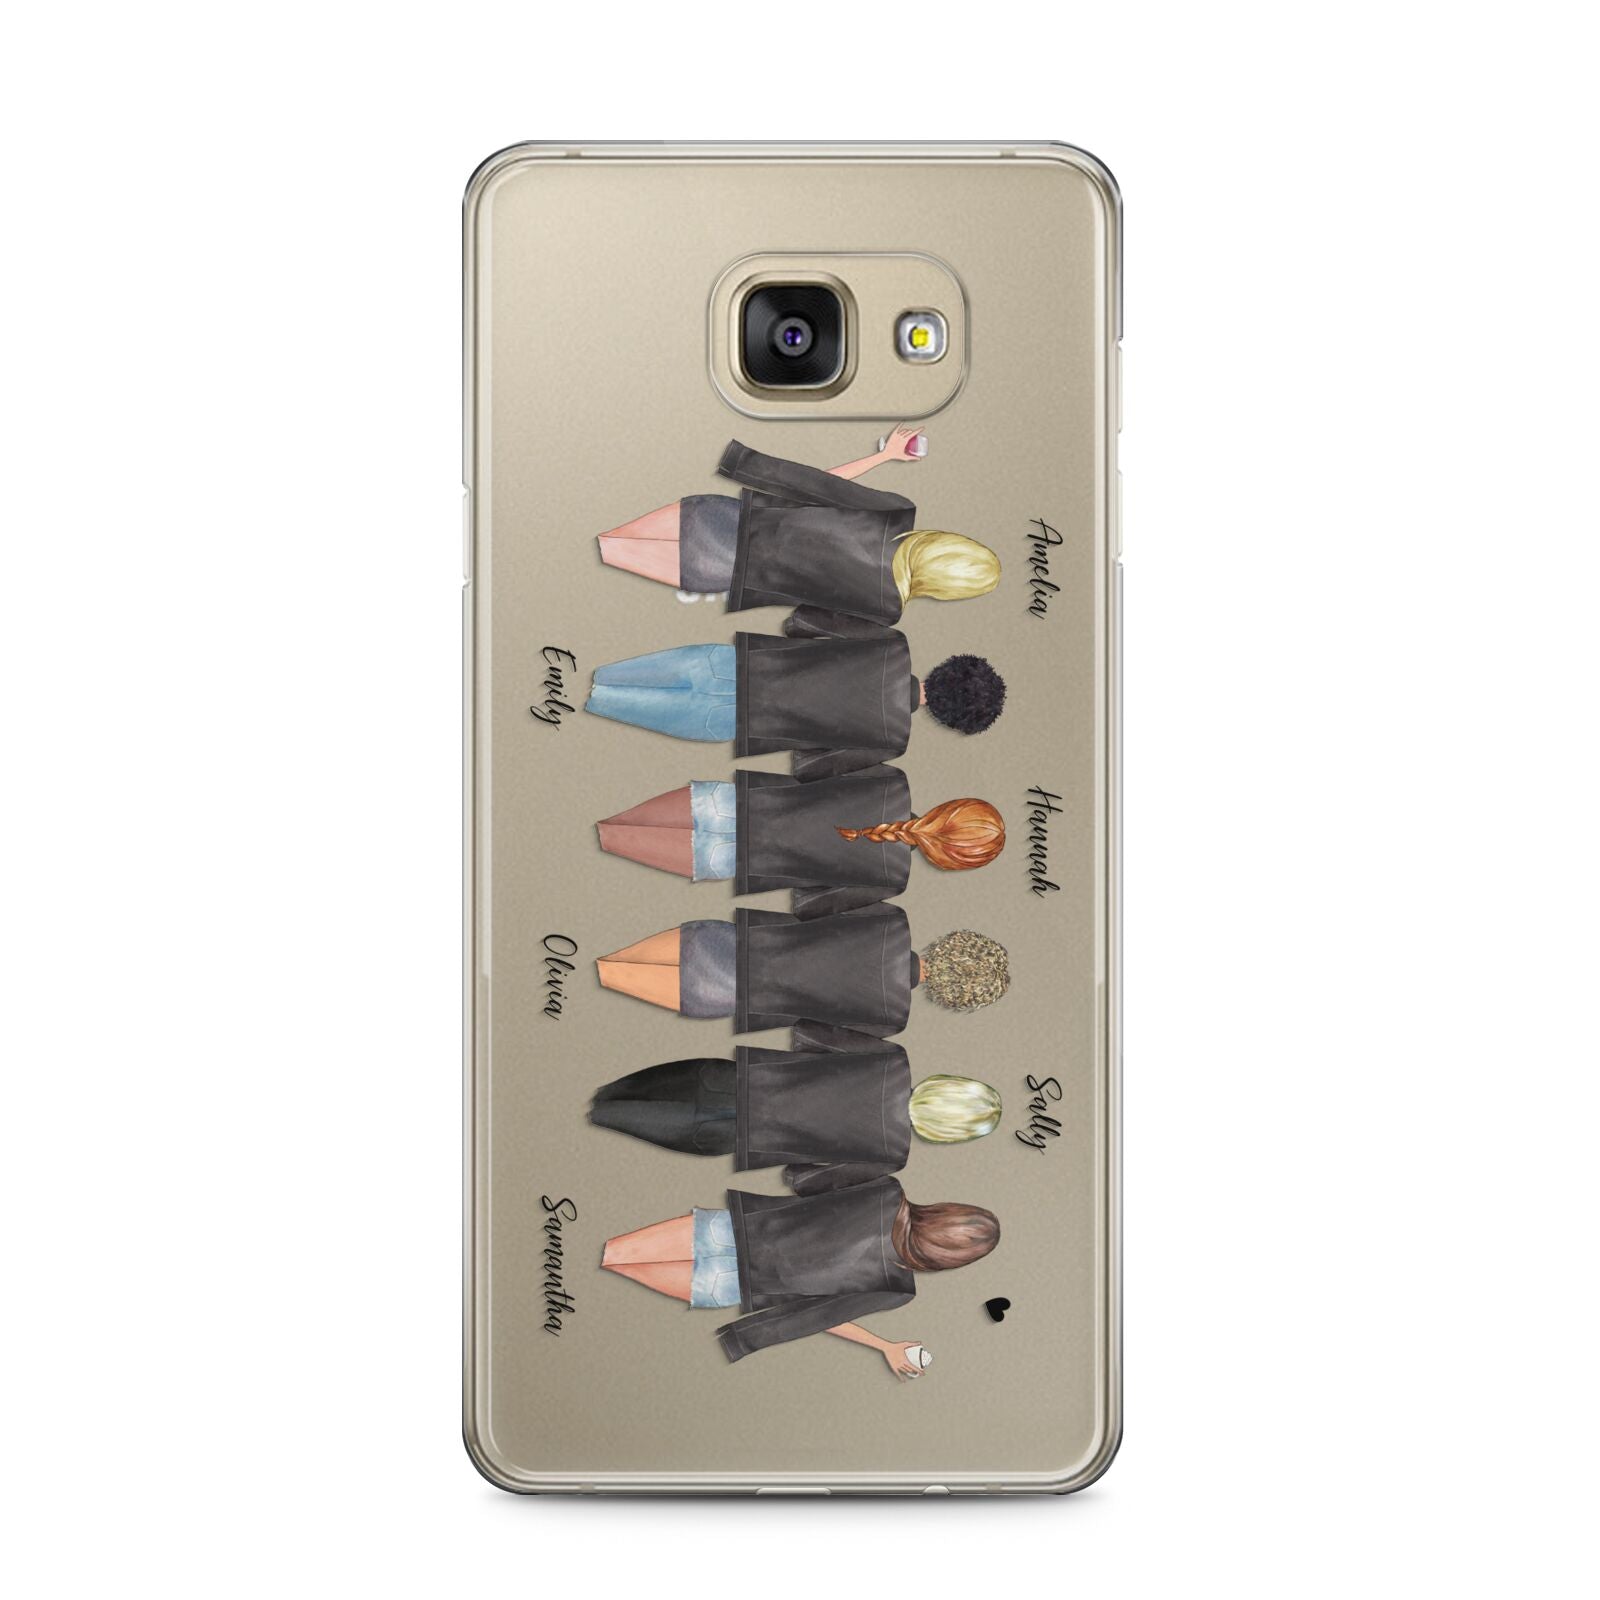 6 Best Friends with Names Samsung Galaxy A5 2016 Case on gold phone